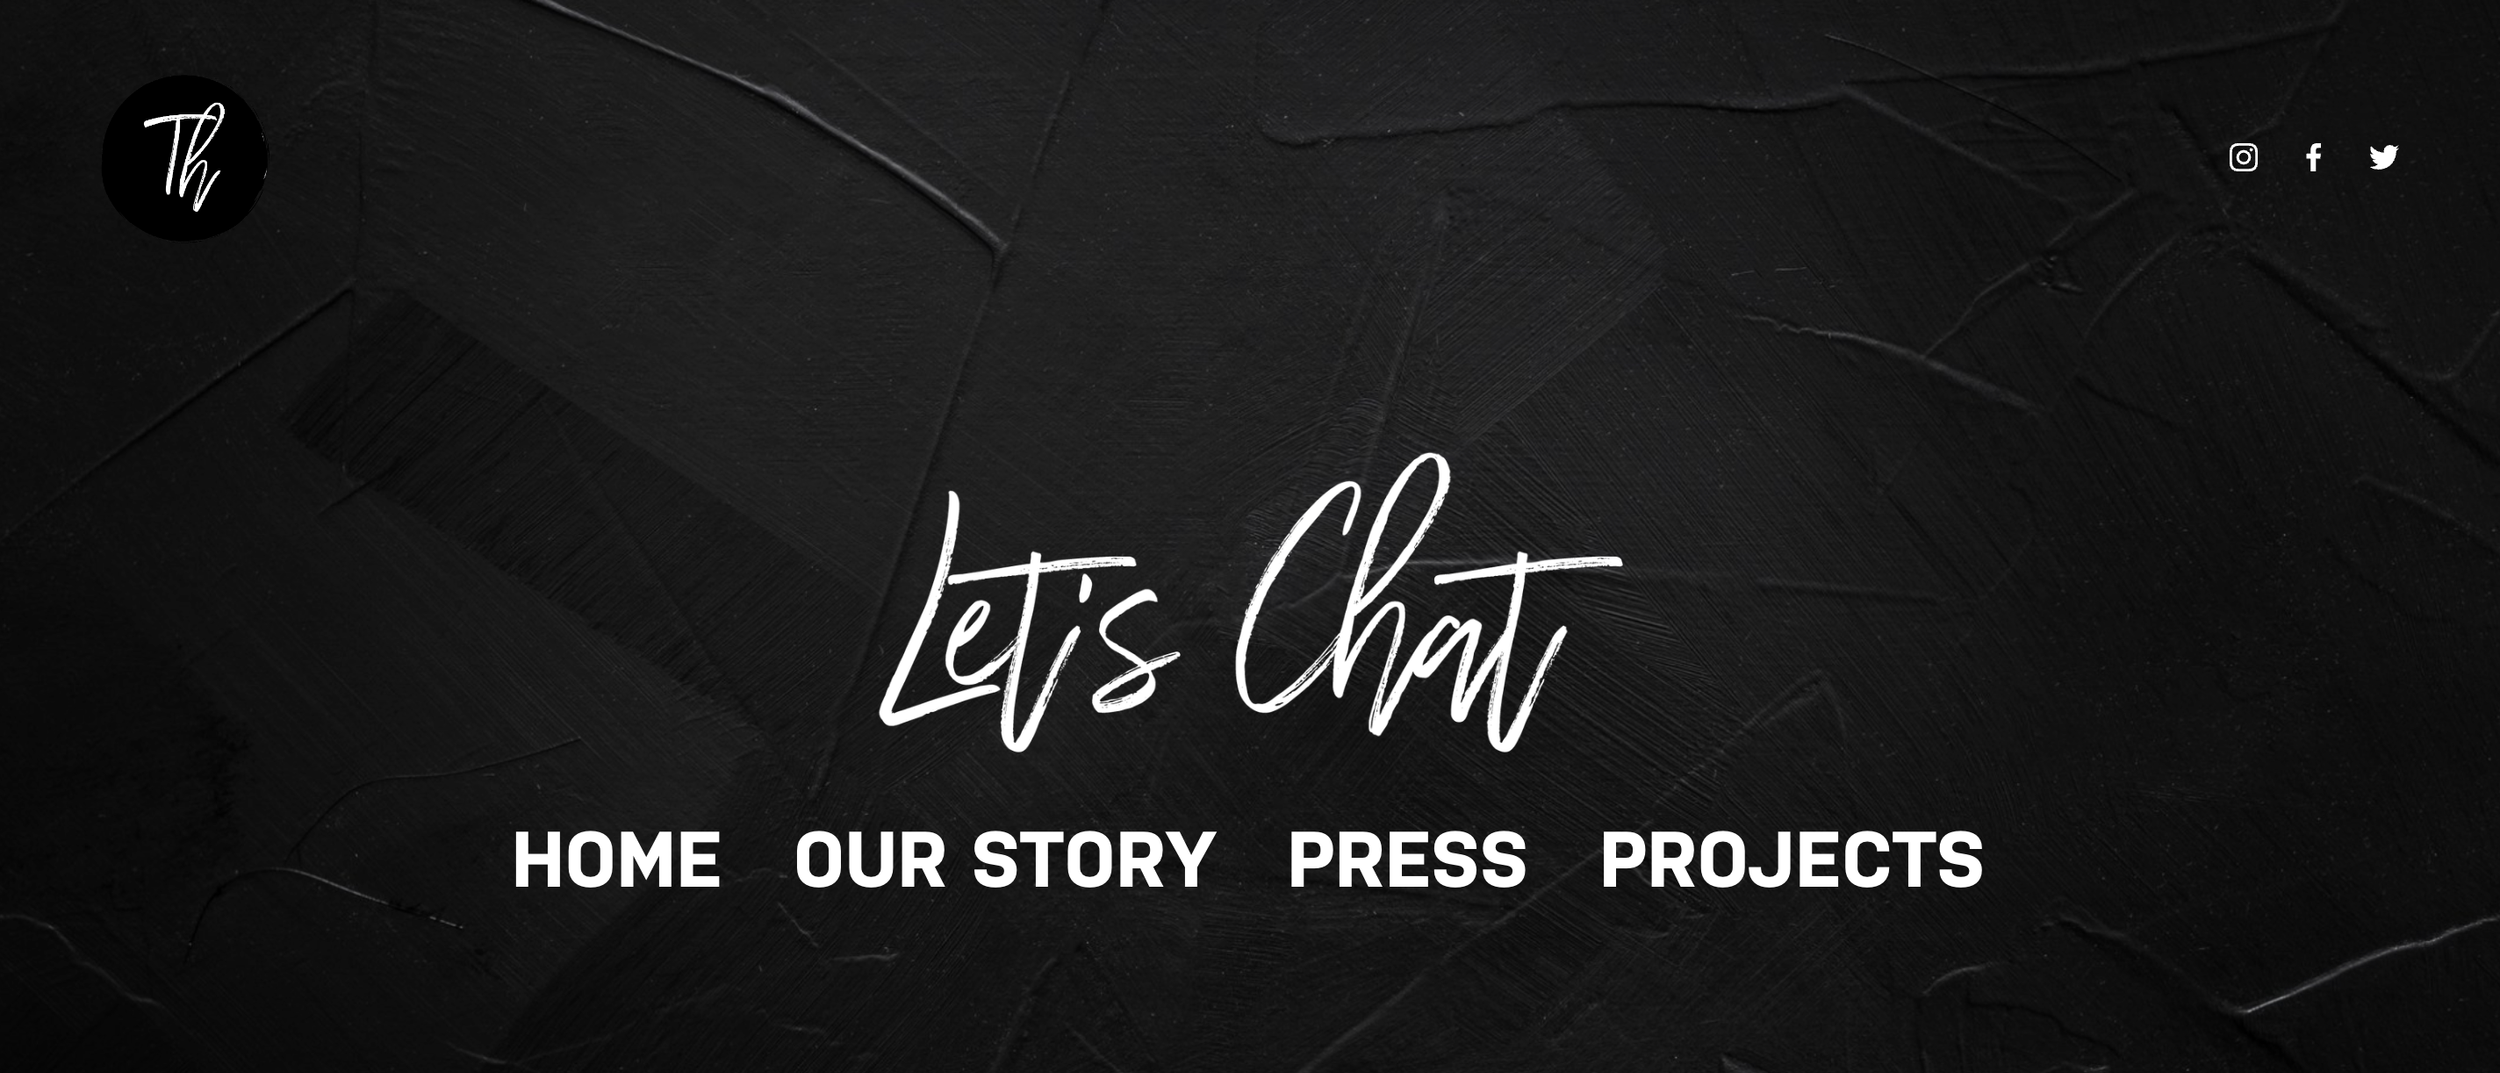 Let's Chat Cover.png